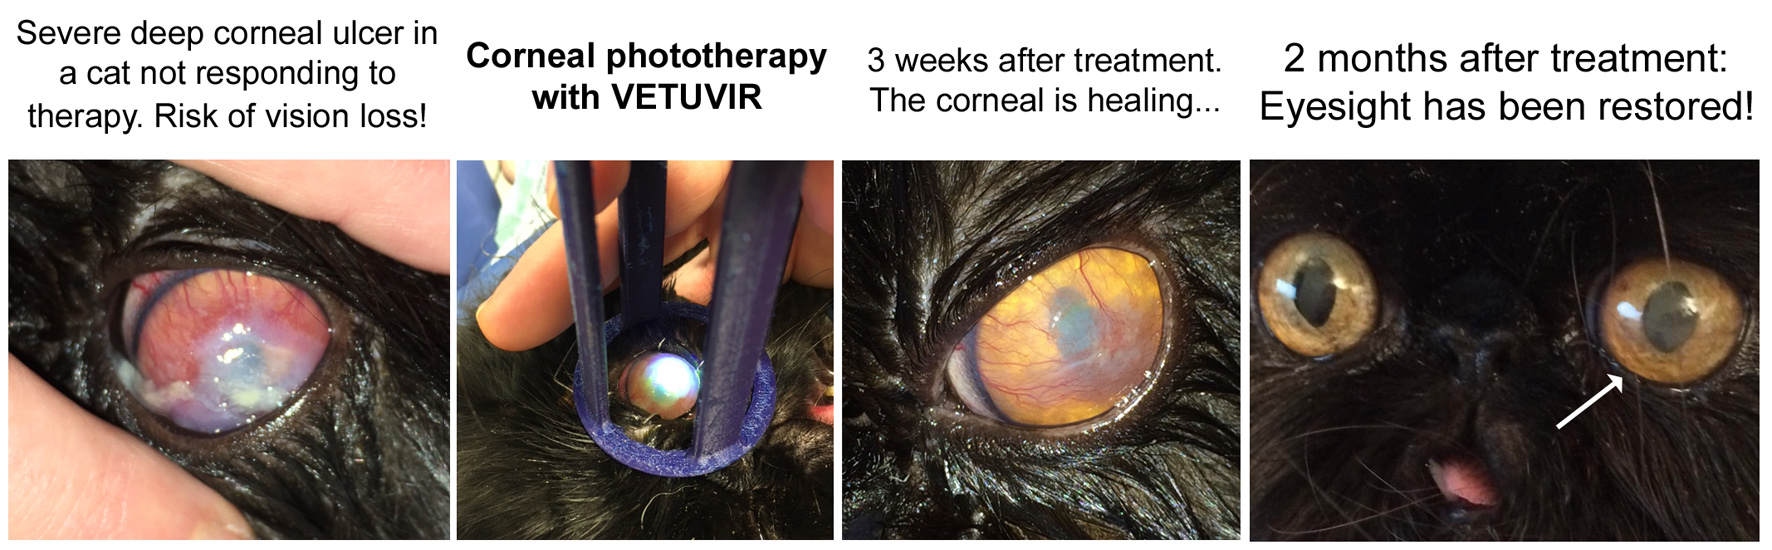 Effective treatment of corneal ulcers in cats using VETUVIR